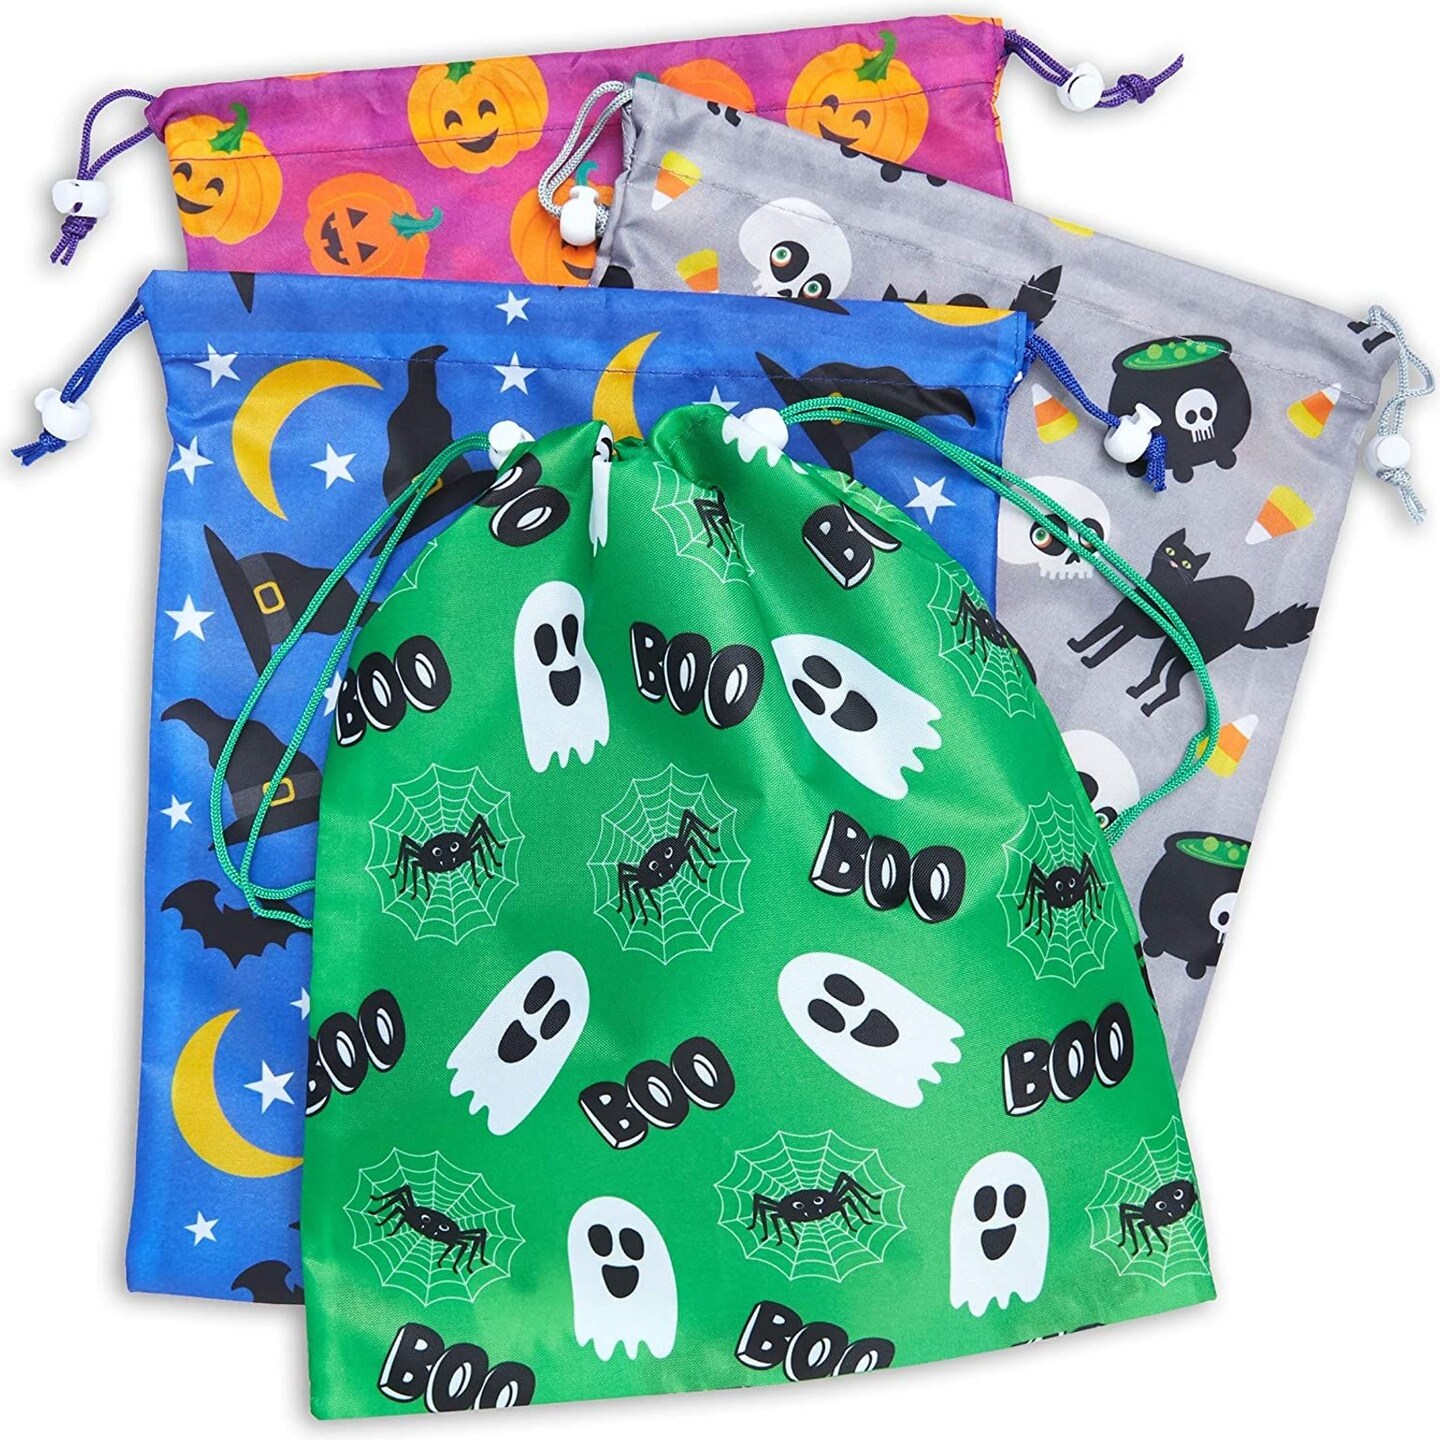 Trick or Treat Canvas Bag - Reusable Halloween Cloth Candy Sack with Draw  String - Bulk Goody Bags